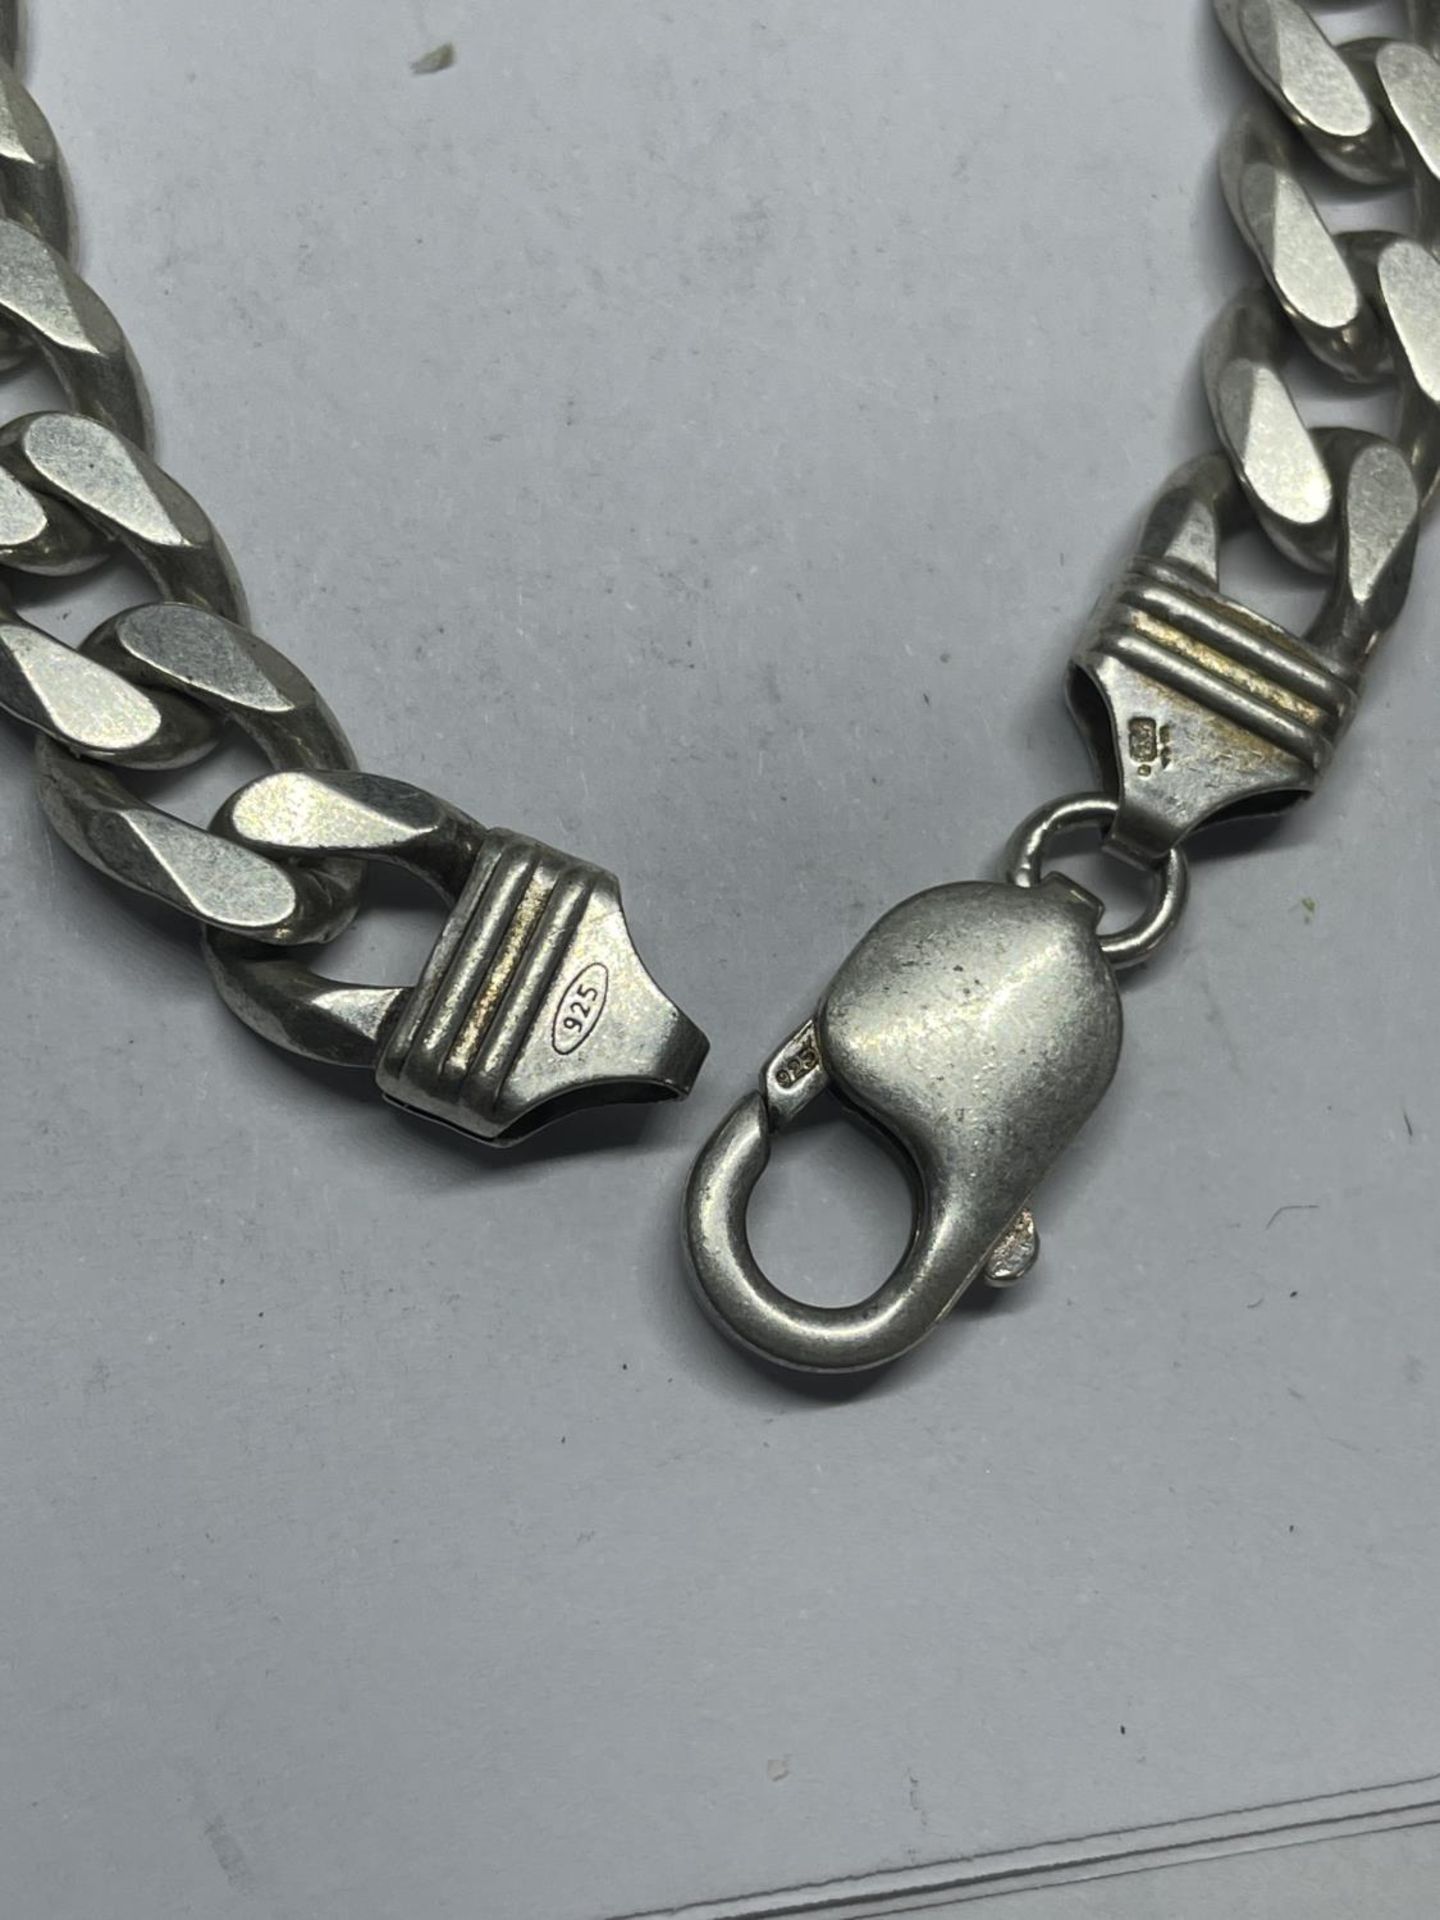 A HEAVY MARKED SILVER FLAT LINK BRACELET LENGTH 20.5 CM WEIGHT 29.7 GRAMS - Image 2 of 2